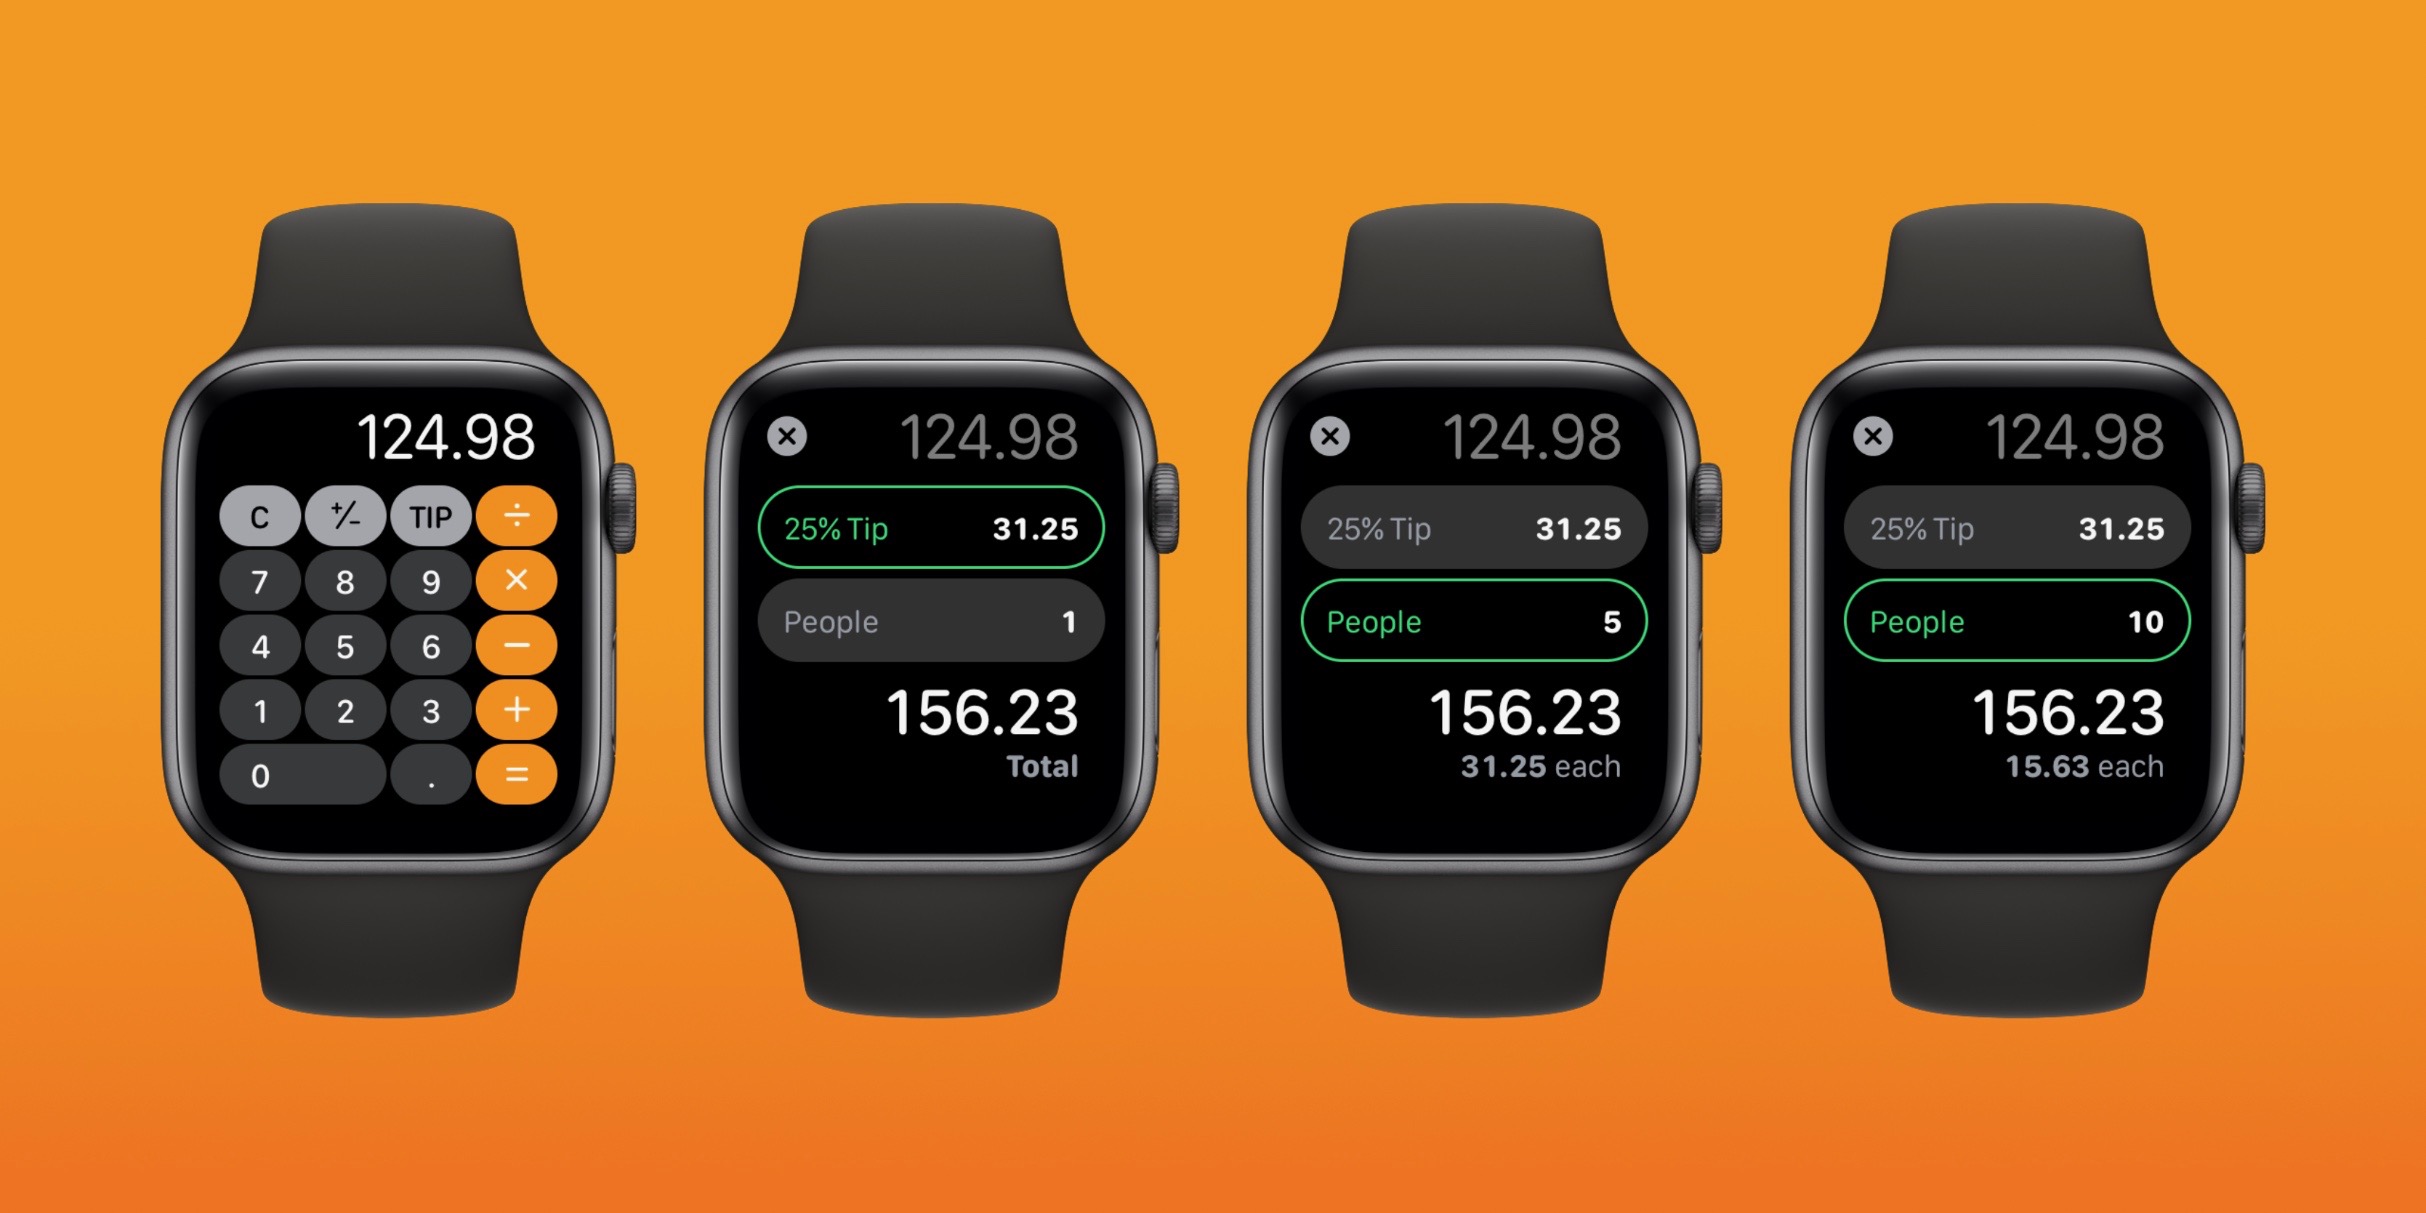 Consume go to work Announcement watchOS 6: How to split bills and calculate tips on Apple Watch - 9to5Mac